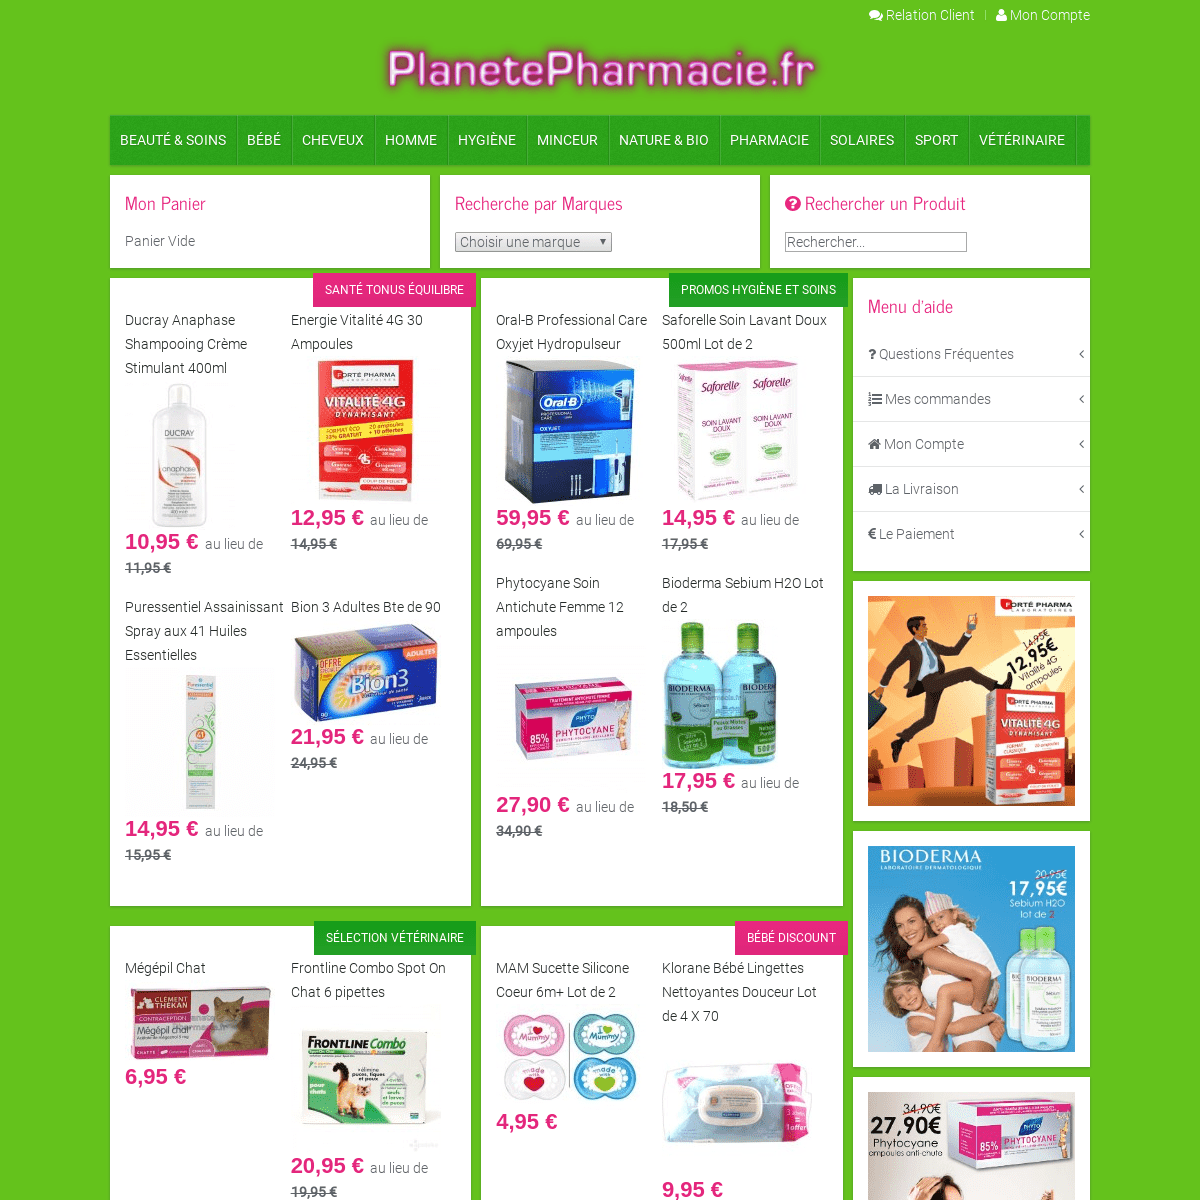 A complete backup of planetepharmacie.fr